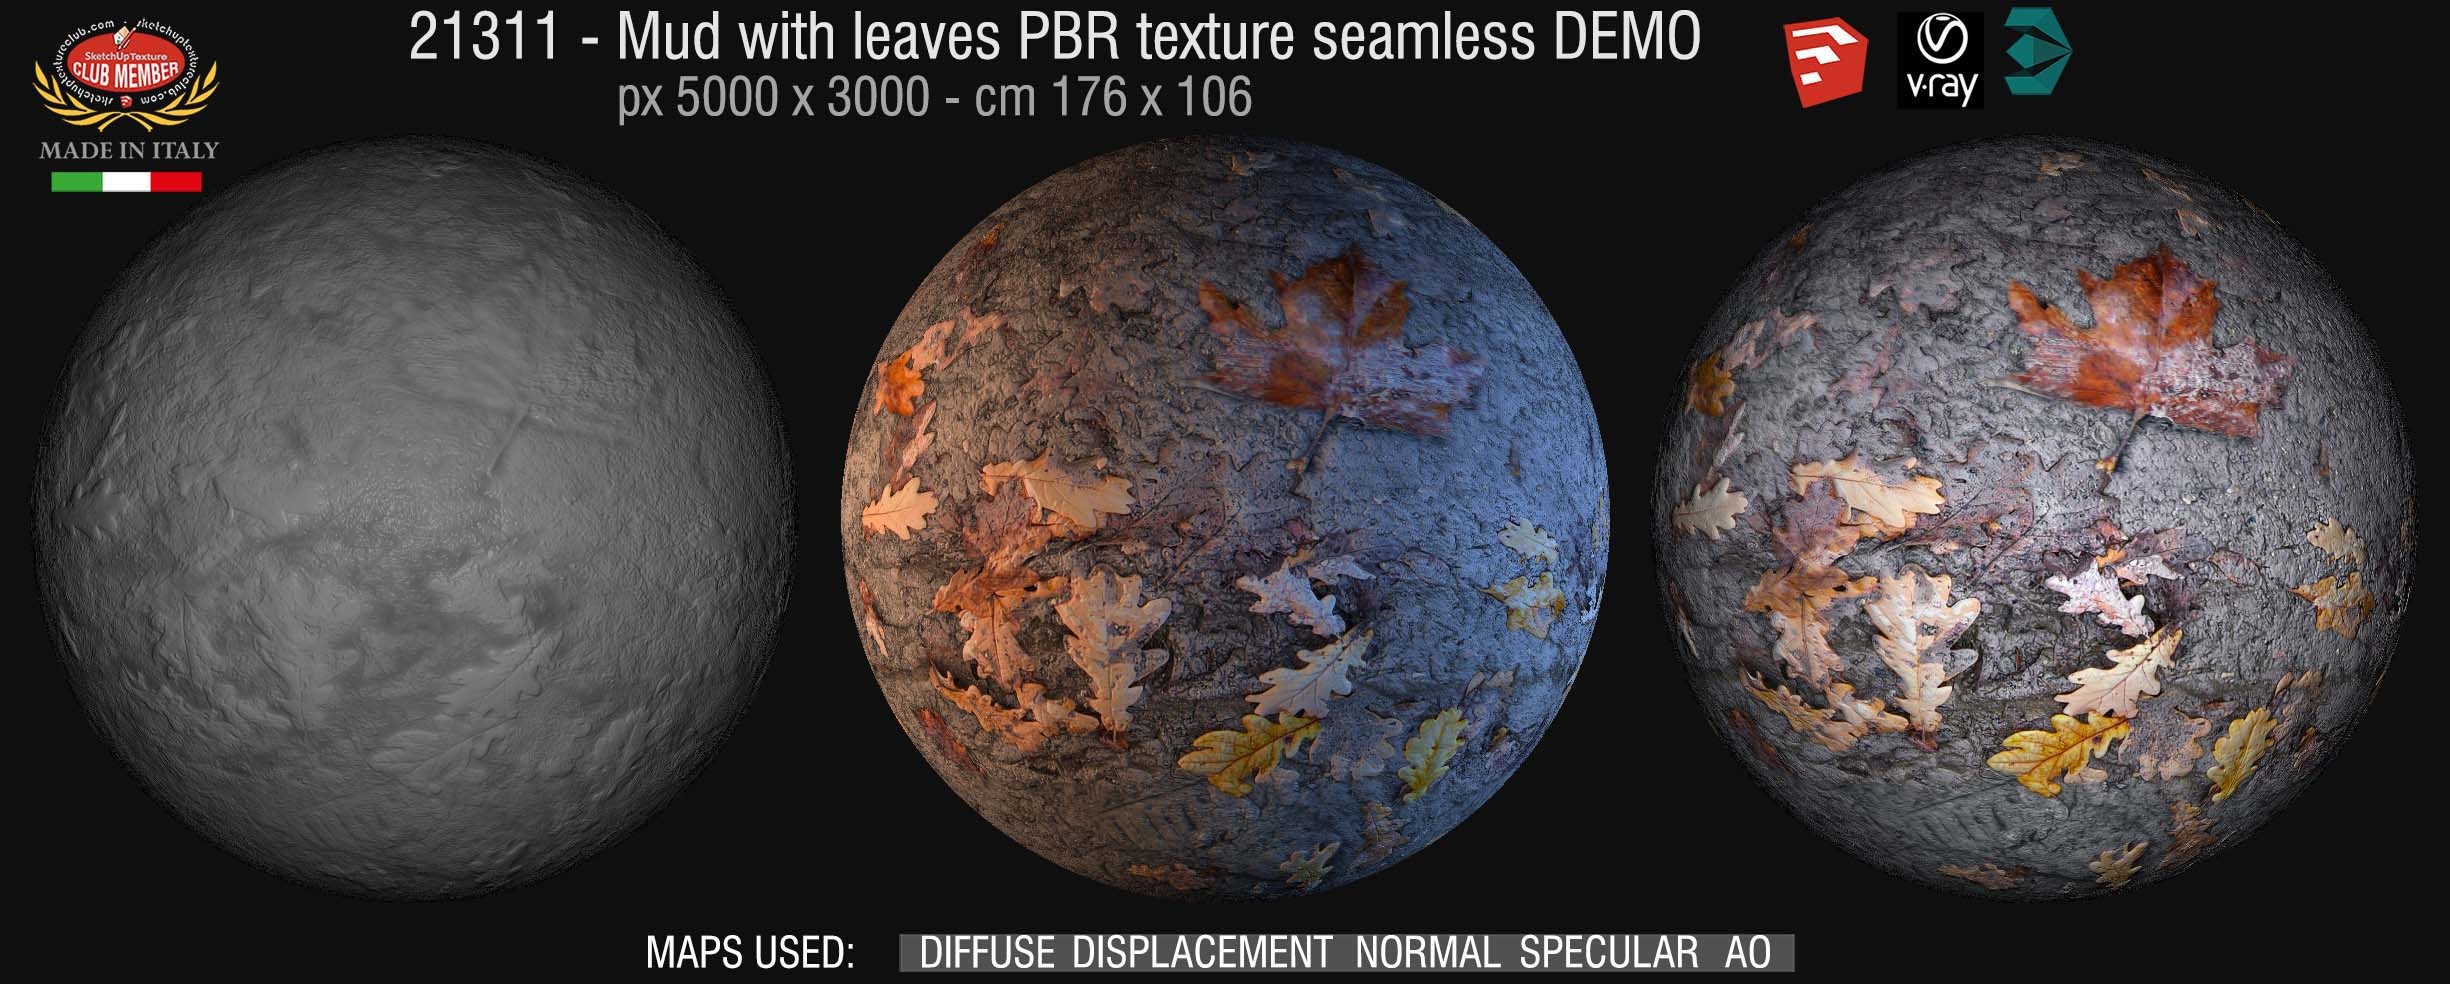 21311 Mud with leaves PBR texture seamless DEMO